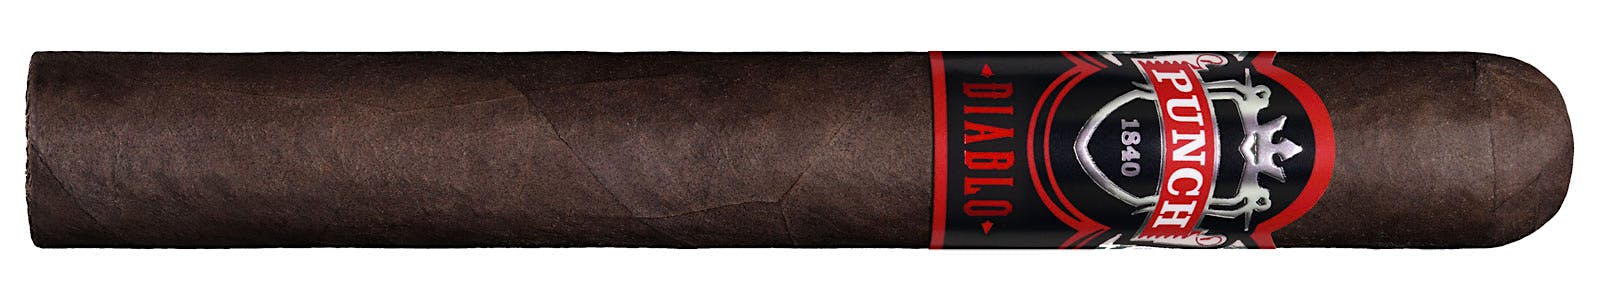 Punch Diablo is wrapped in a Sumatra-seed leaf from Ecuador that General is calling oscuro.